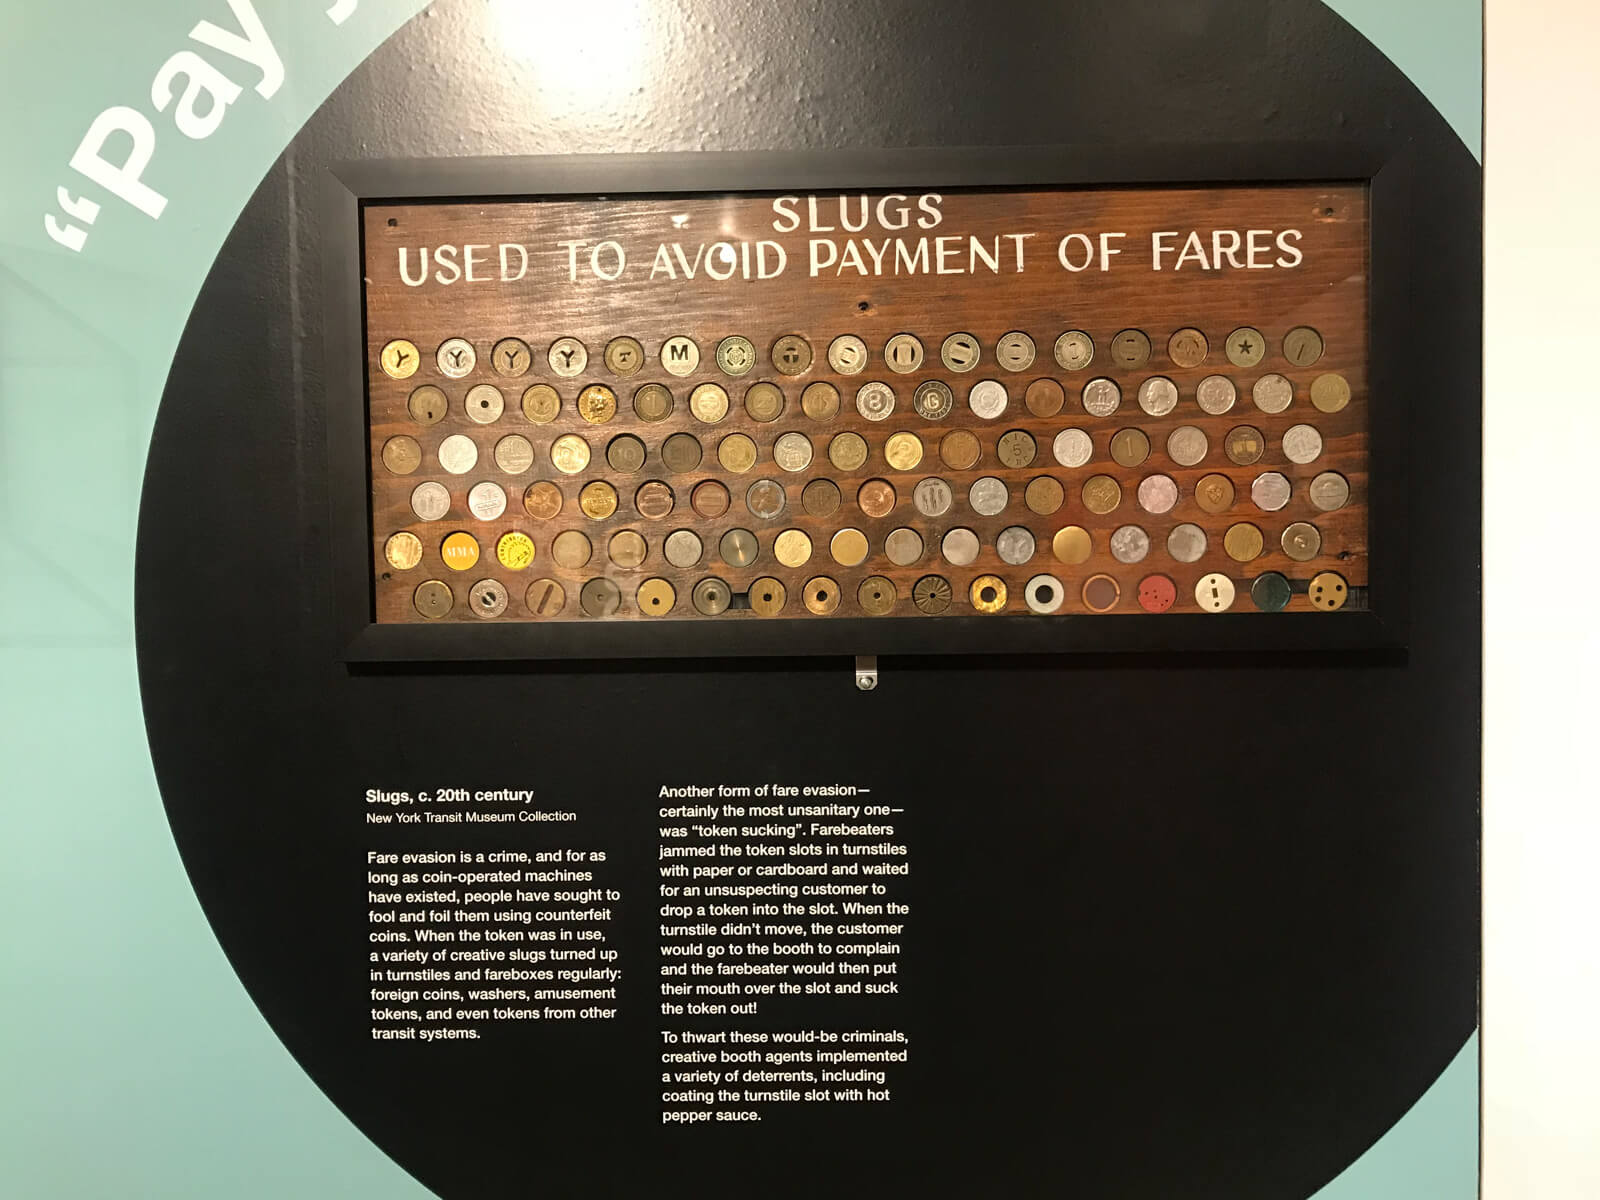 A display on a wall of many different fake tokens, resembling metal coins, used to avoid paying fares to ride the train